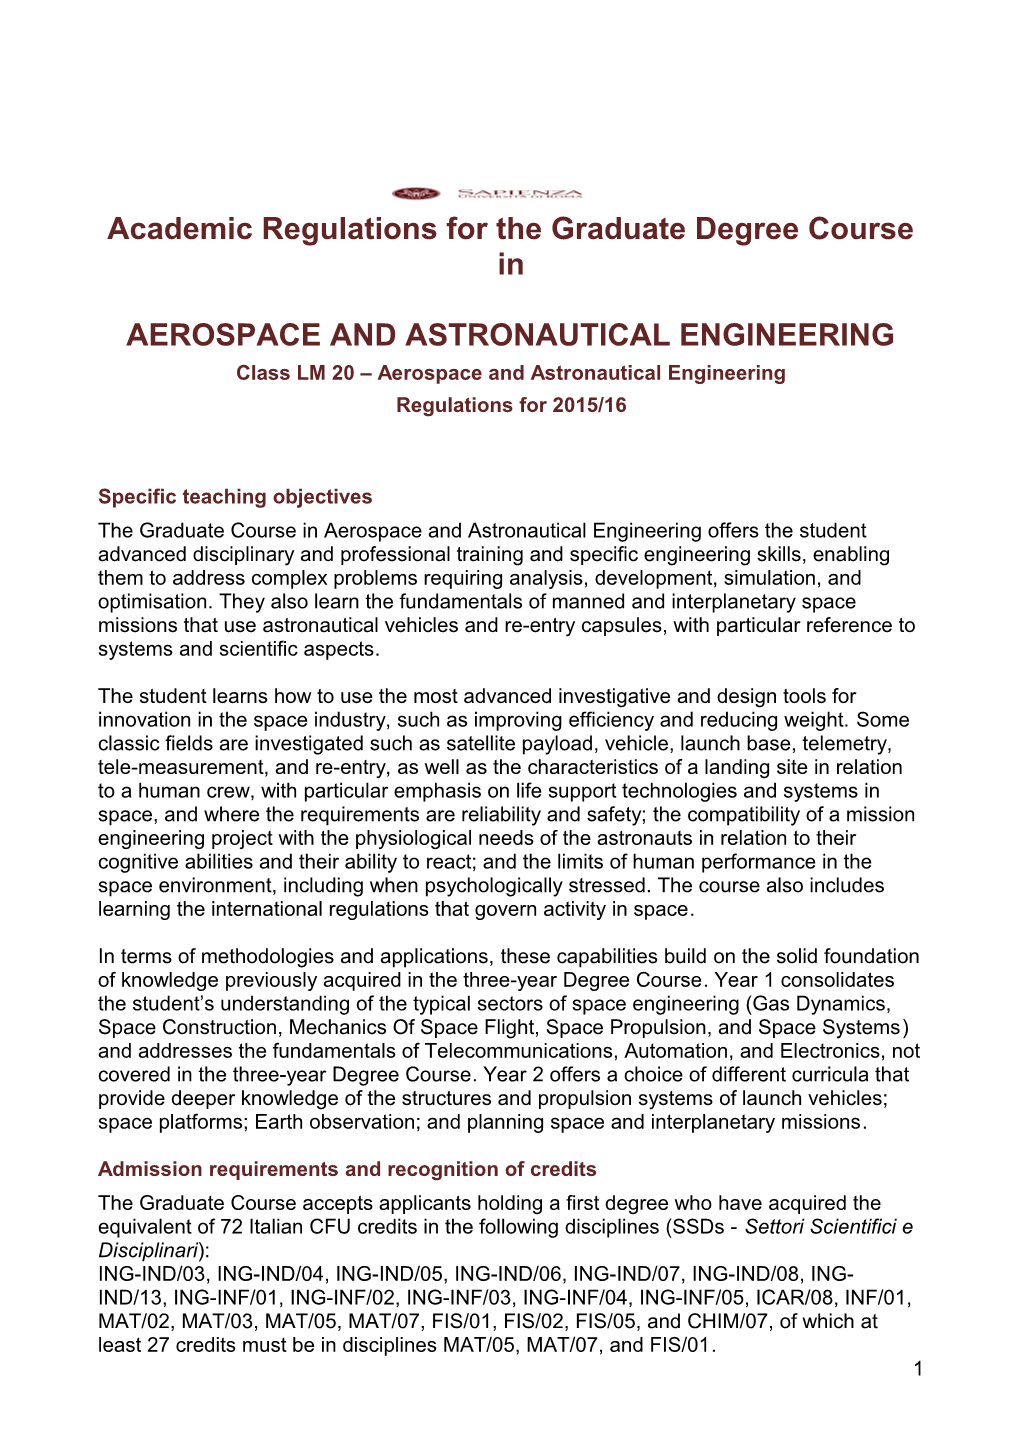 Academic Regulations for the Graduate Degree Course In